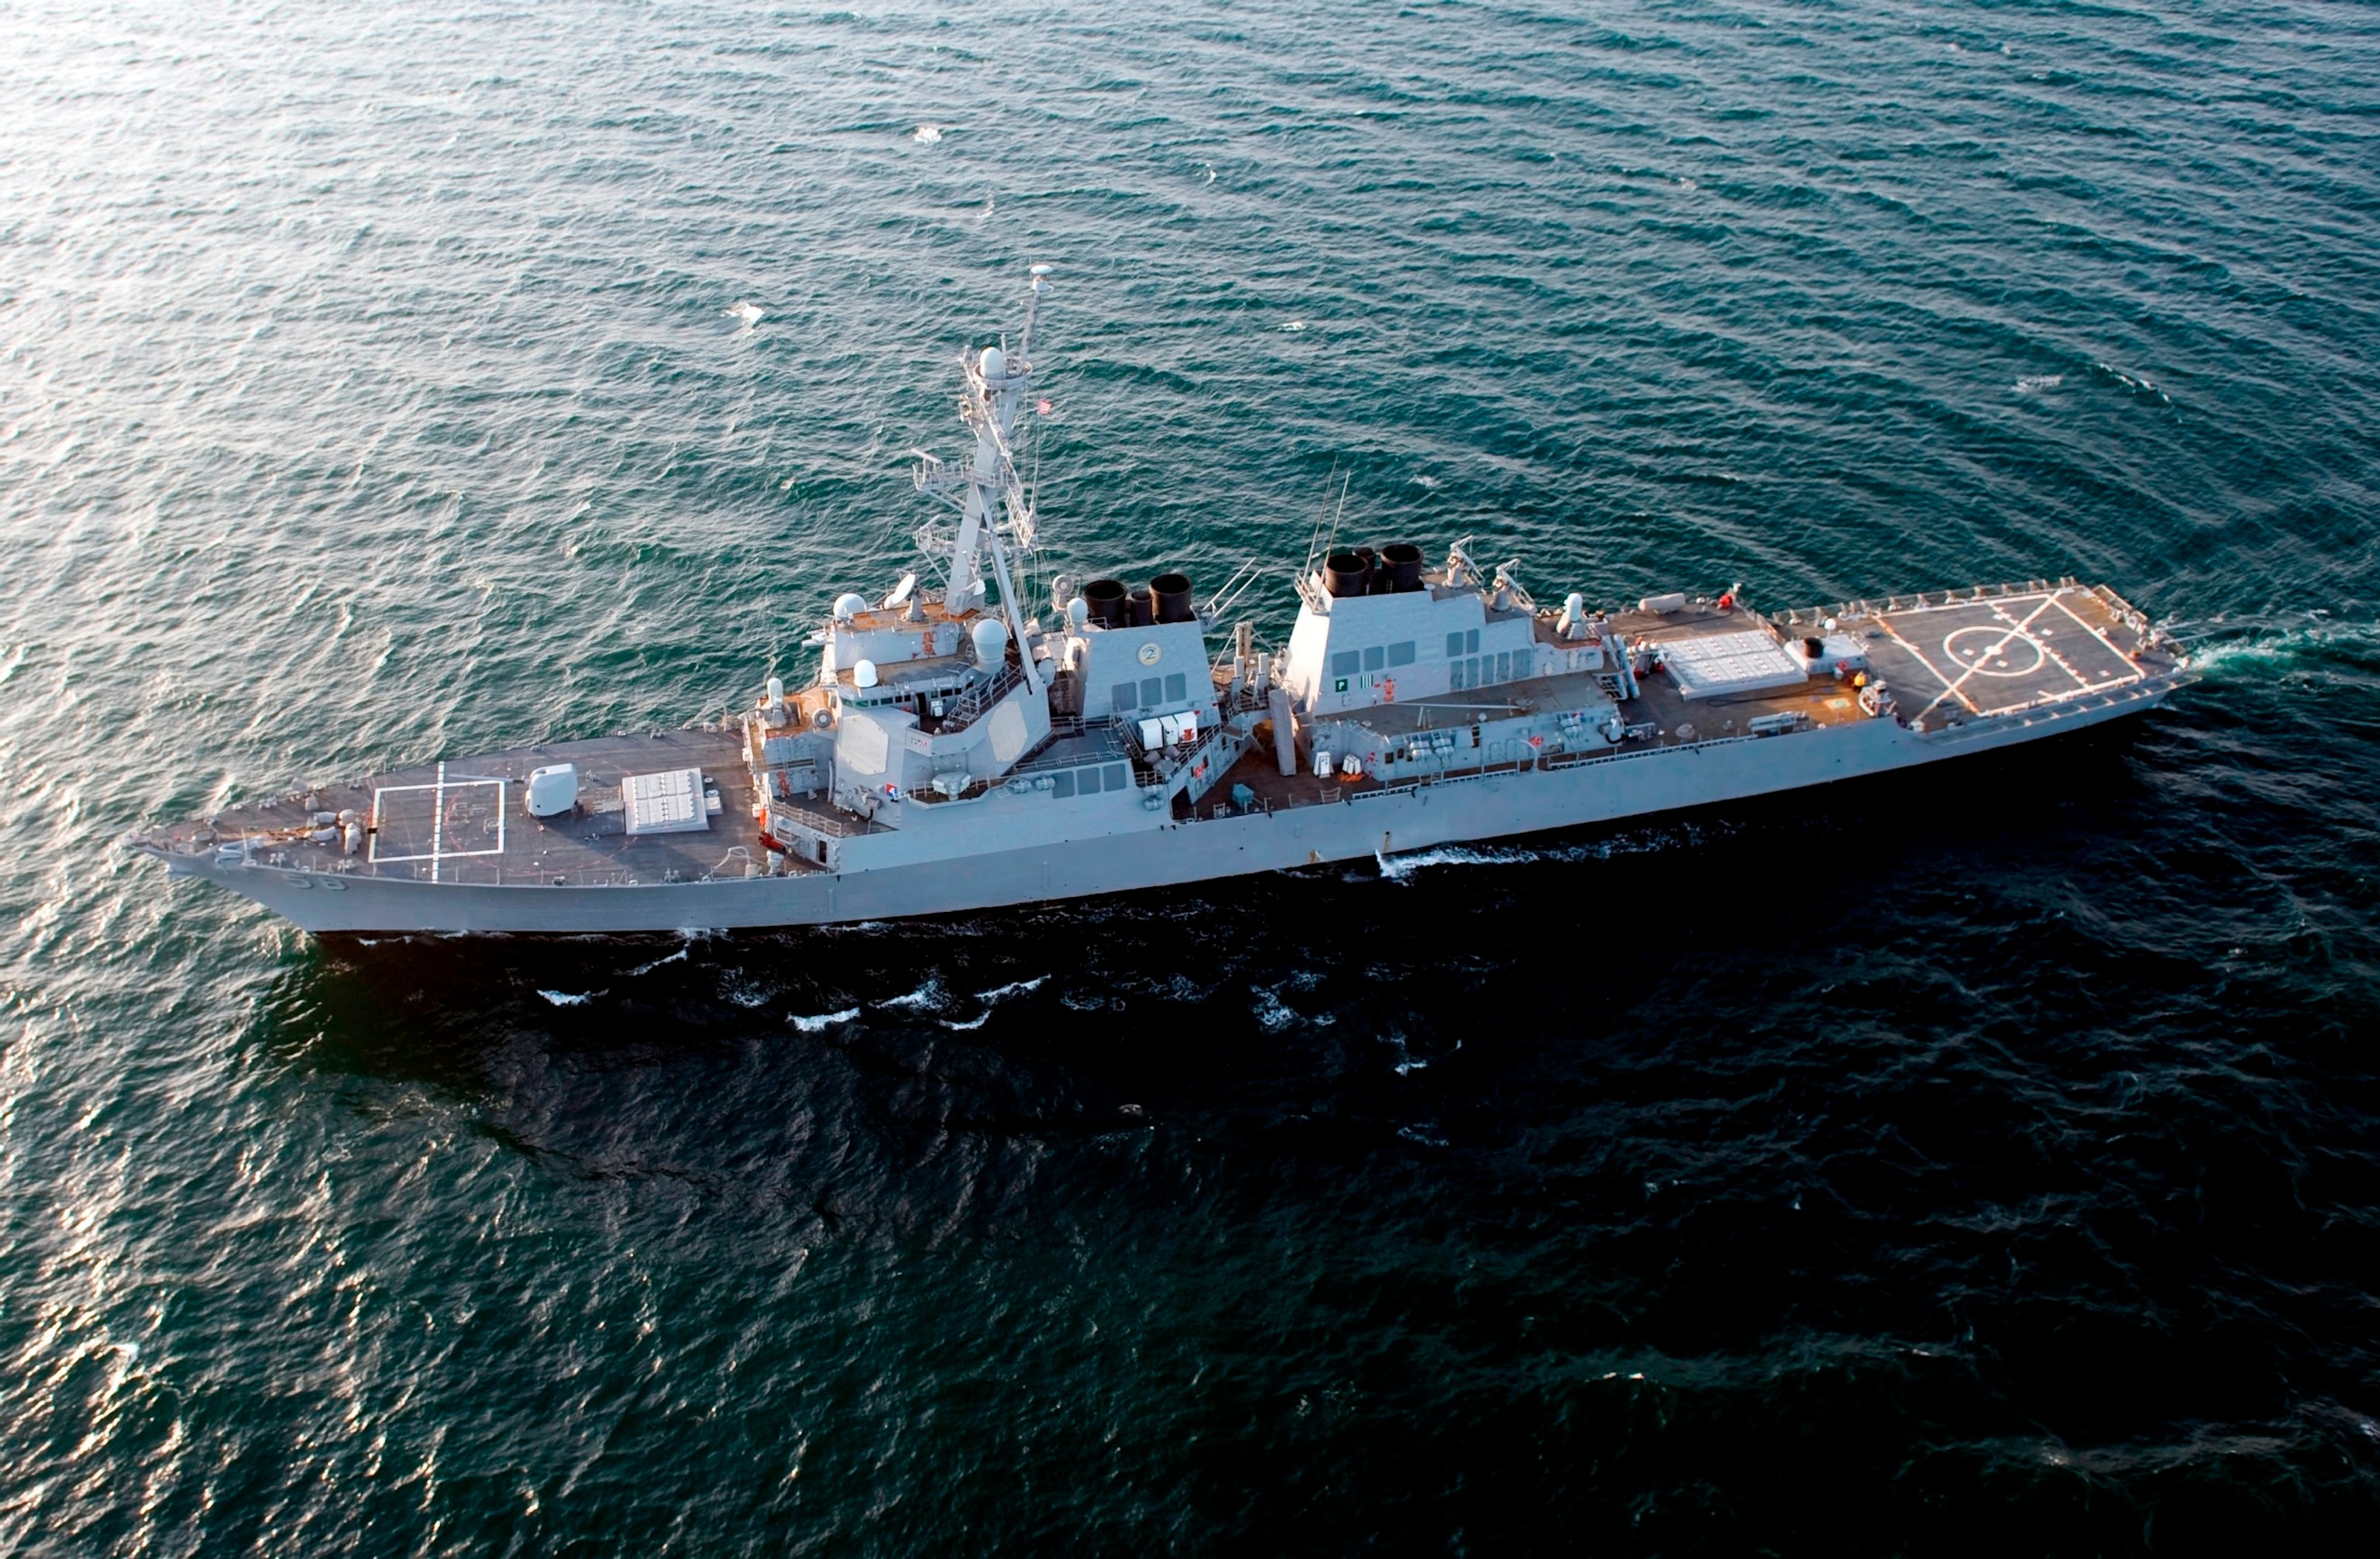 PHOTO: The guided-missile destroyer USS Laboon (DDG 58) underway in the Atlantic Ocean, March 12, 2012.